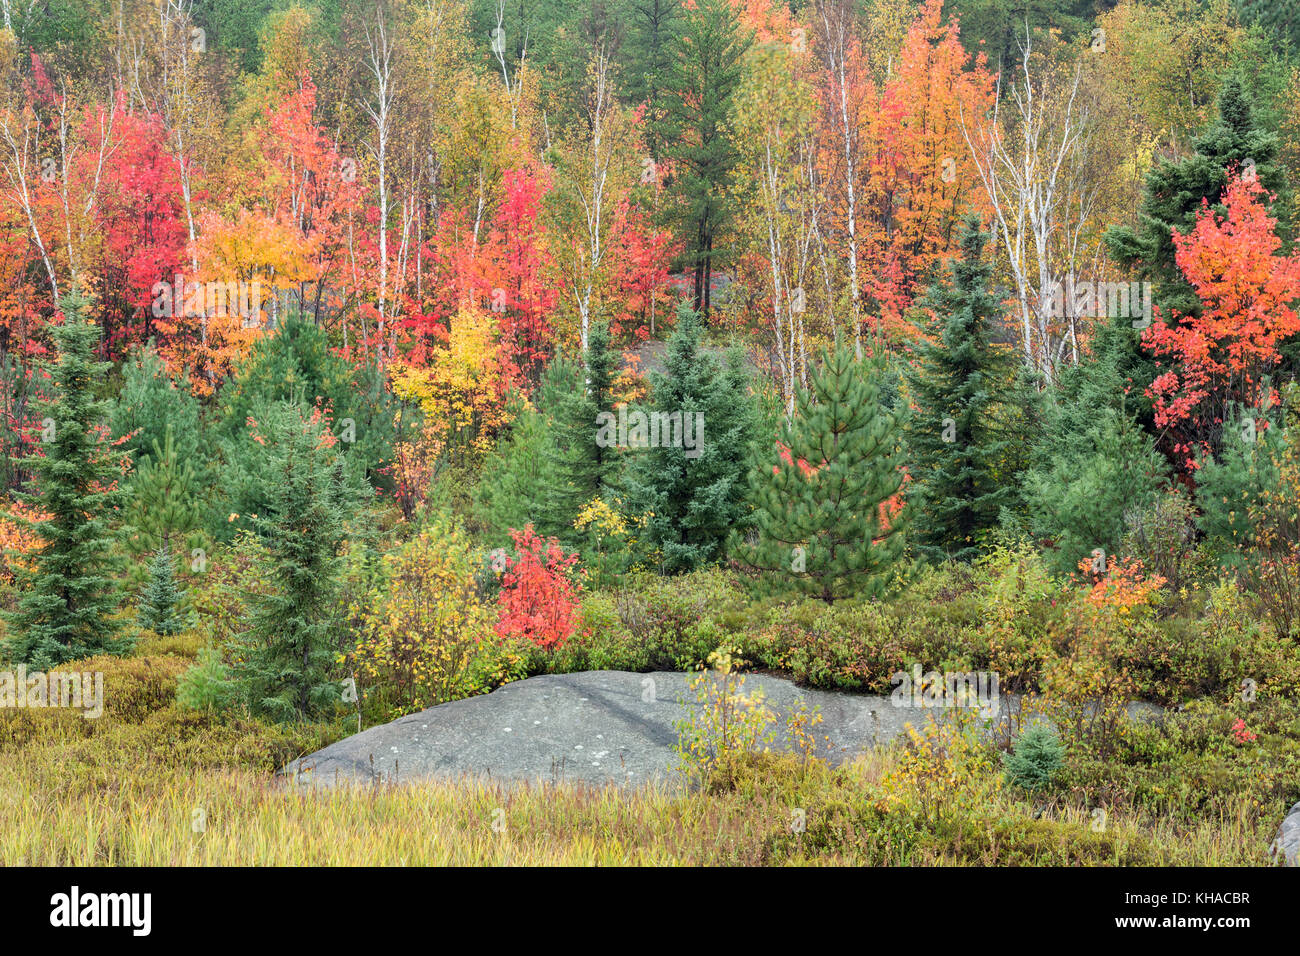 Forest in autumn, Lively, City of Greater Sudbury, Ontario, Canada Stock Photo